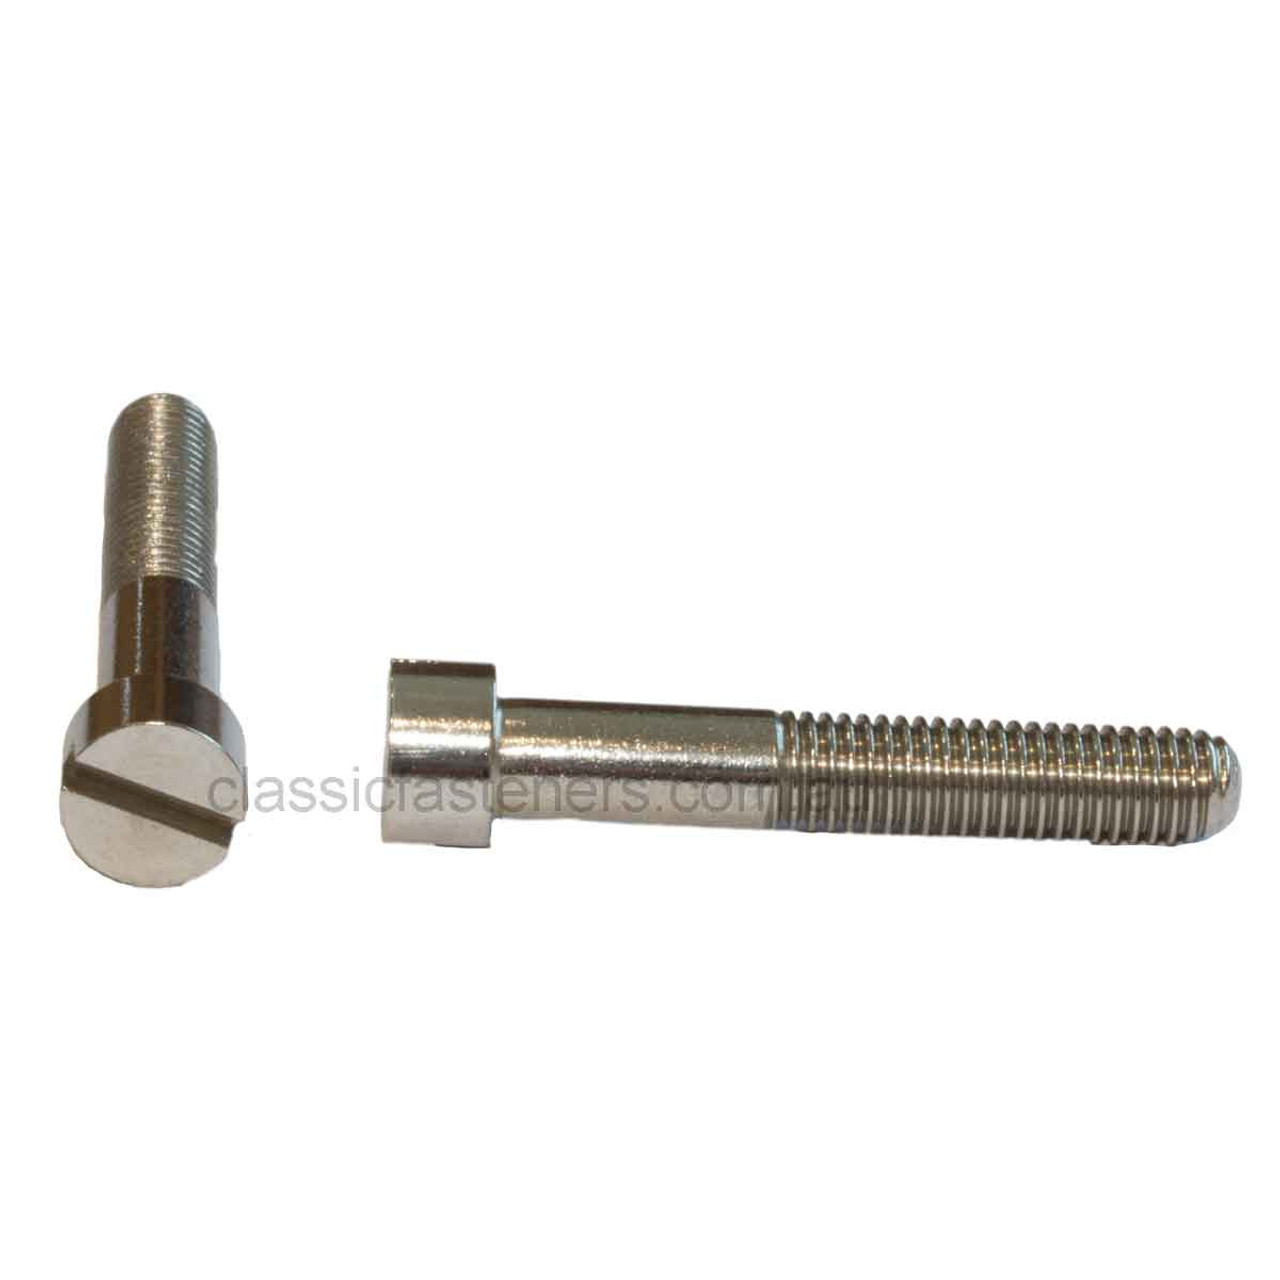 Cheese Head Stainless Slot 1/4 BSF x 1 1/2